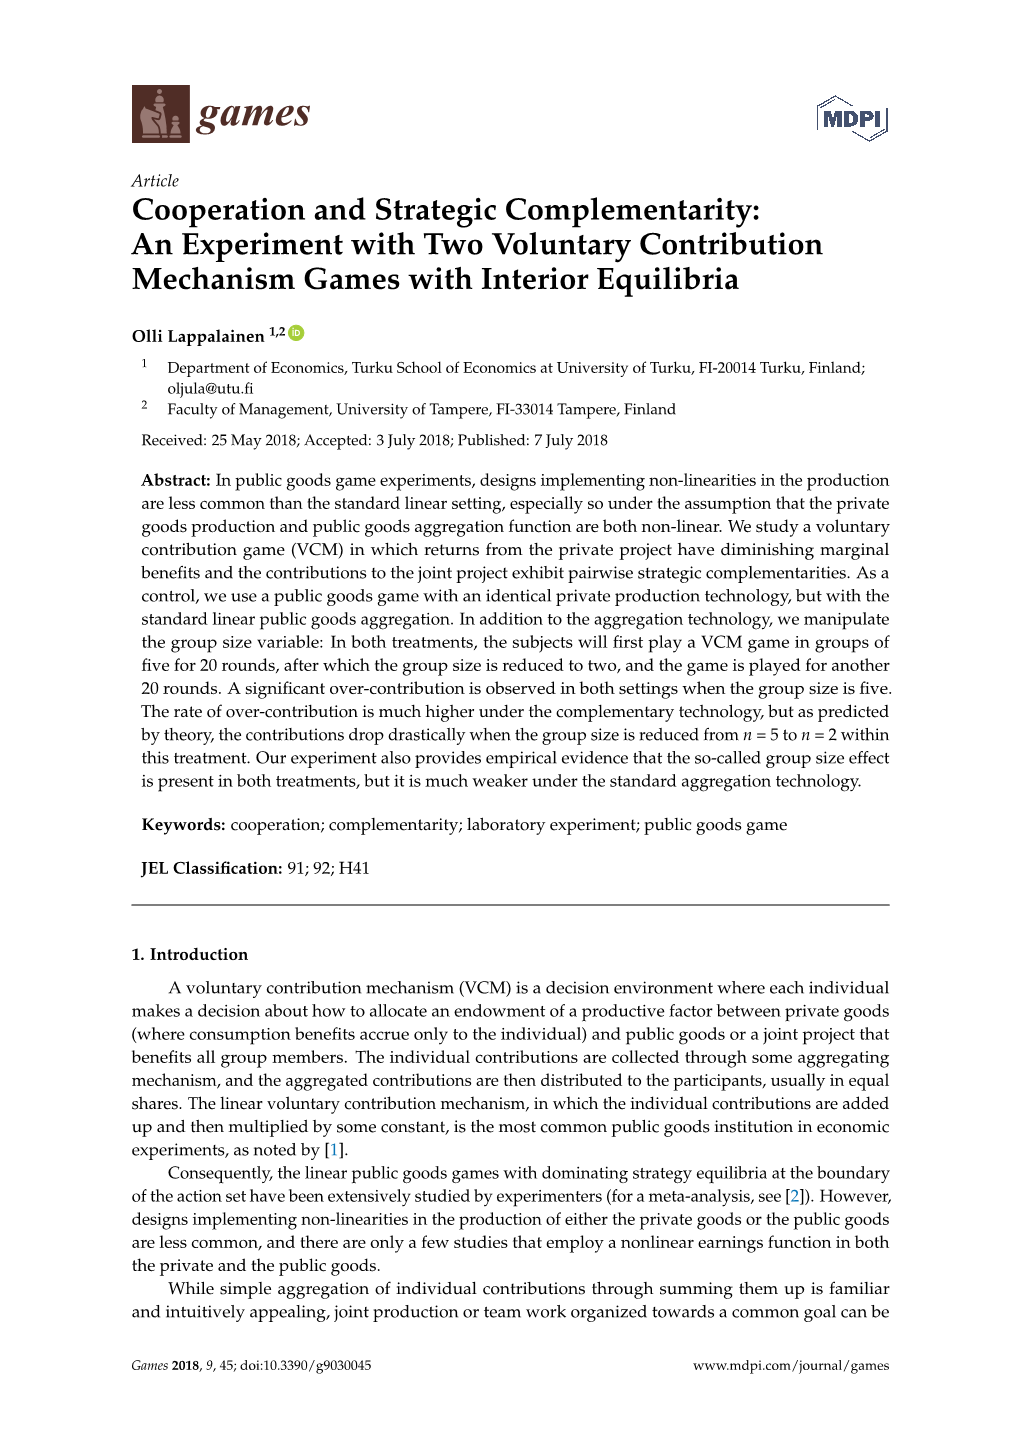 Cooperation and Strategic Complementarity: an Experiment with Two Voluntary Contribution Mechanism Games with Interior Equilibria